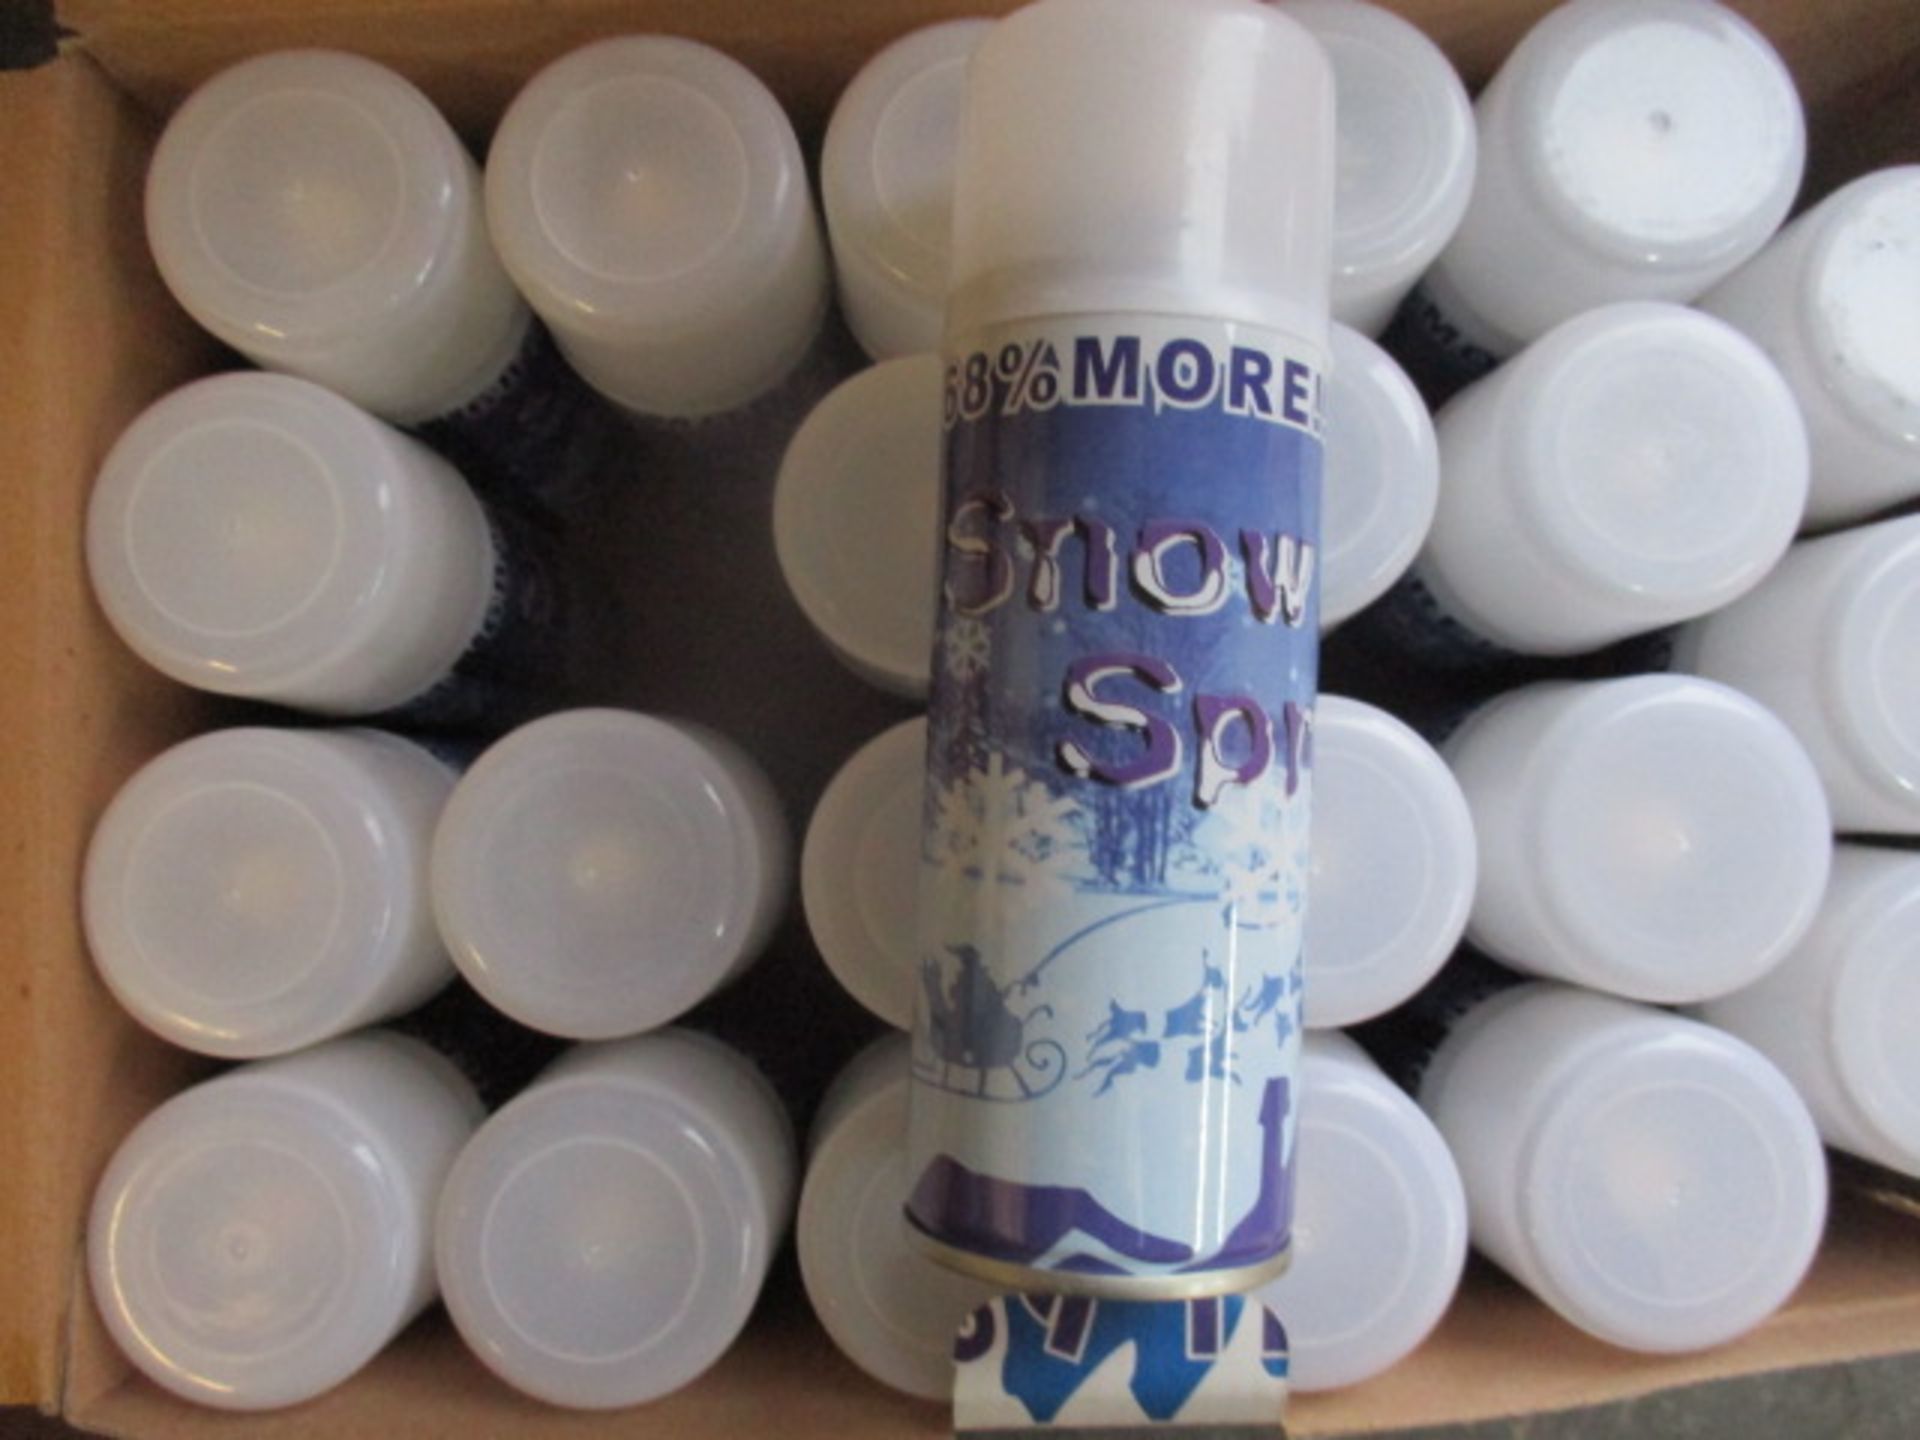 500.pcs snow spray in retail display cartons (24.pcs in carton) New unused, some maybe most of - Image 2 of 2